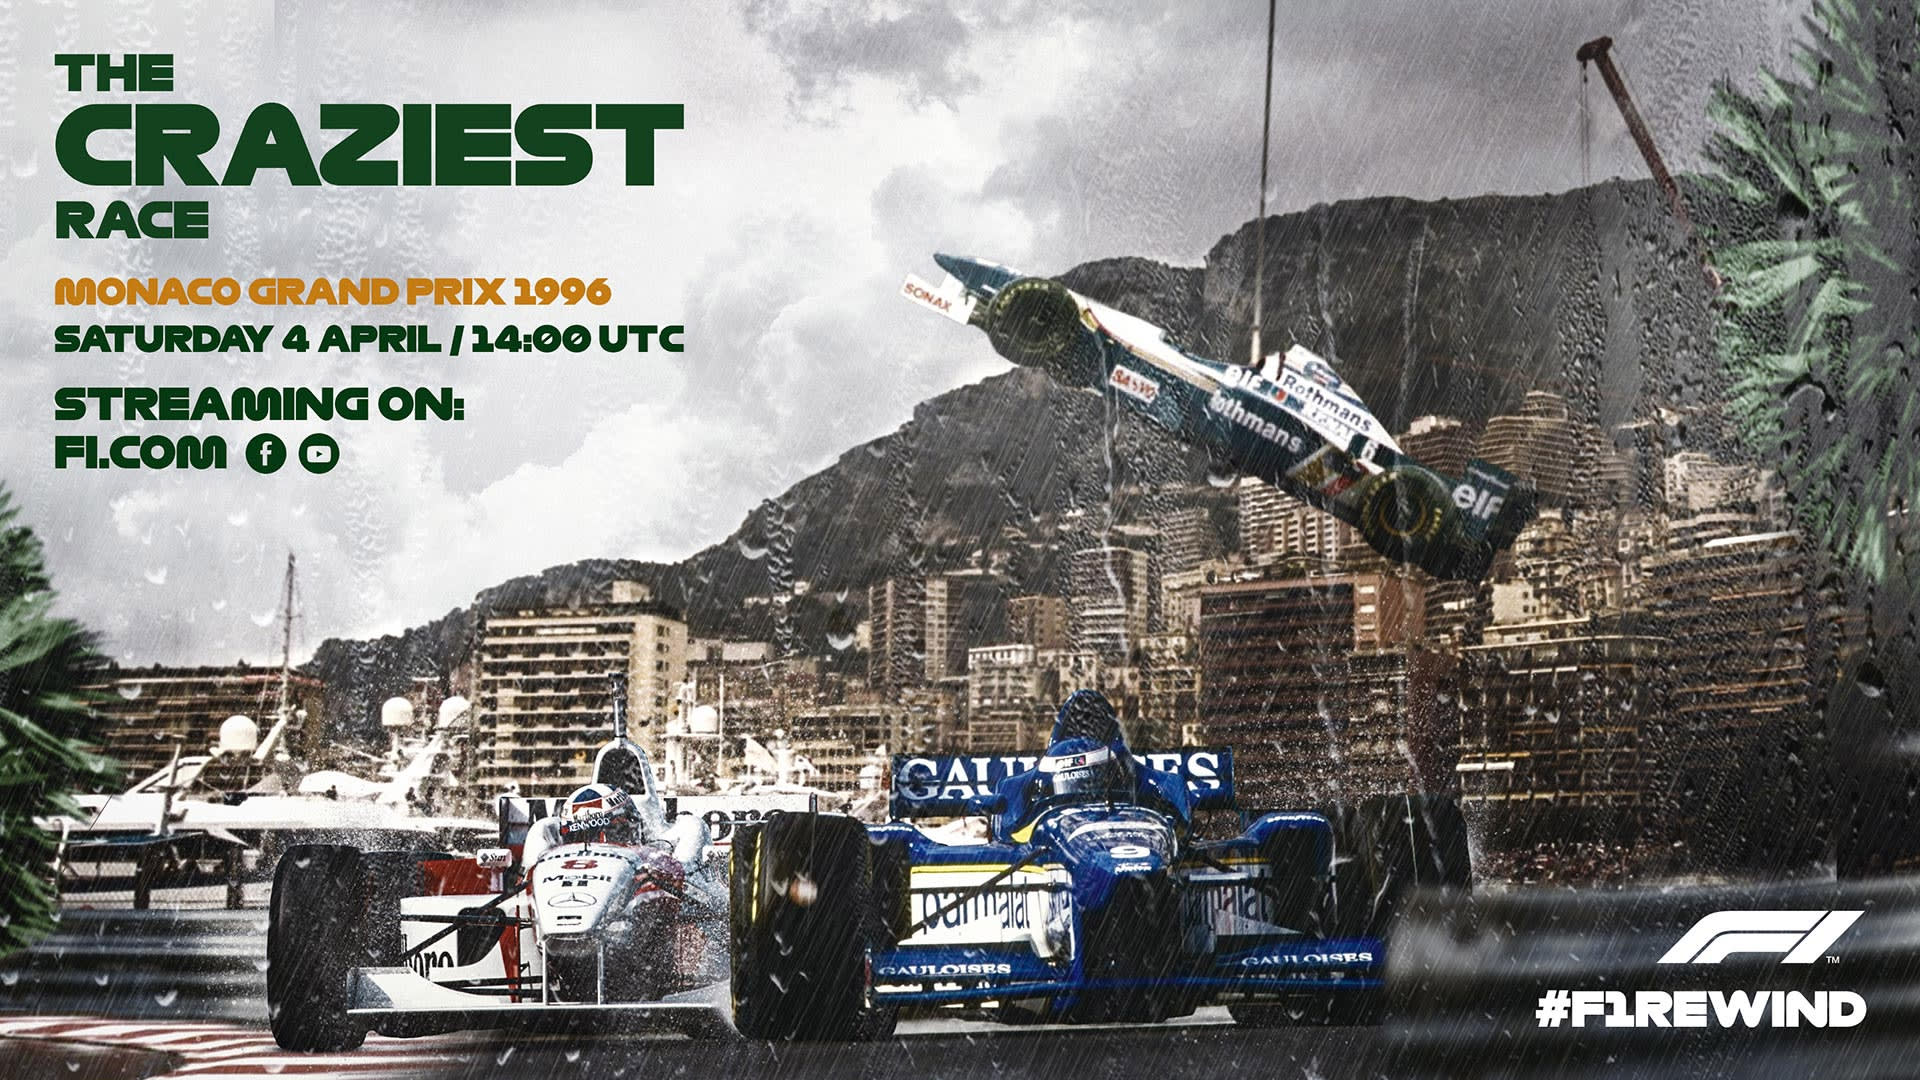 Watch one of the greatest wet races ever in our re-run of the 1996 Monaco Grand Prix Formula 1®